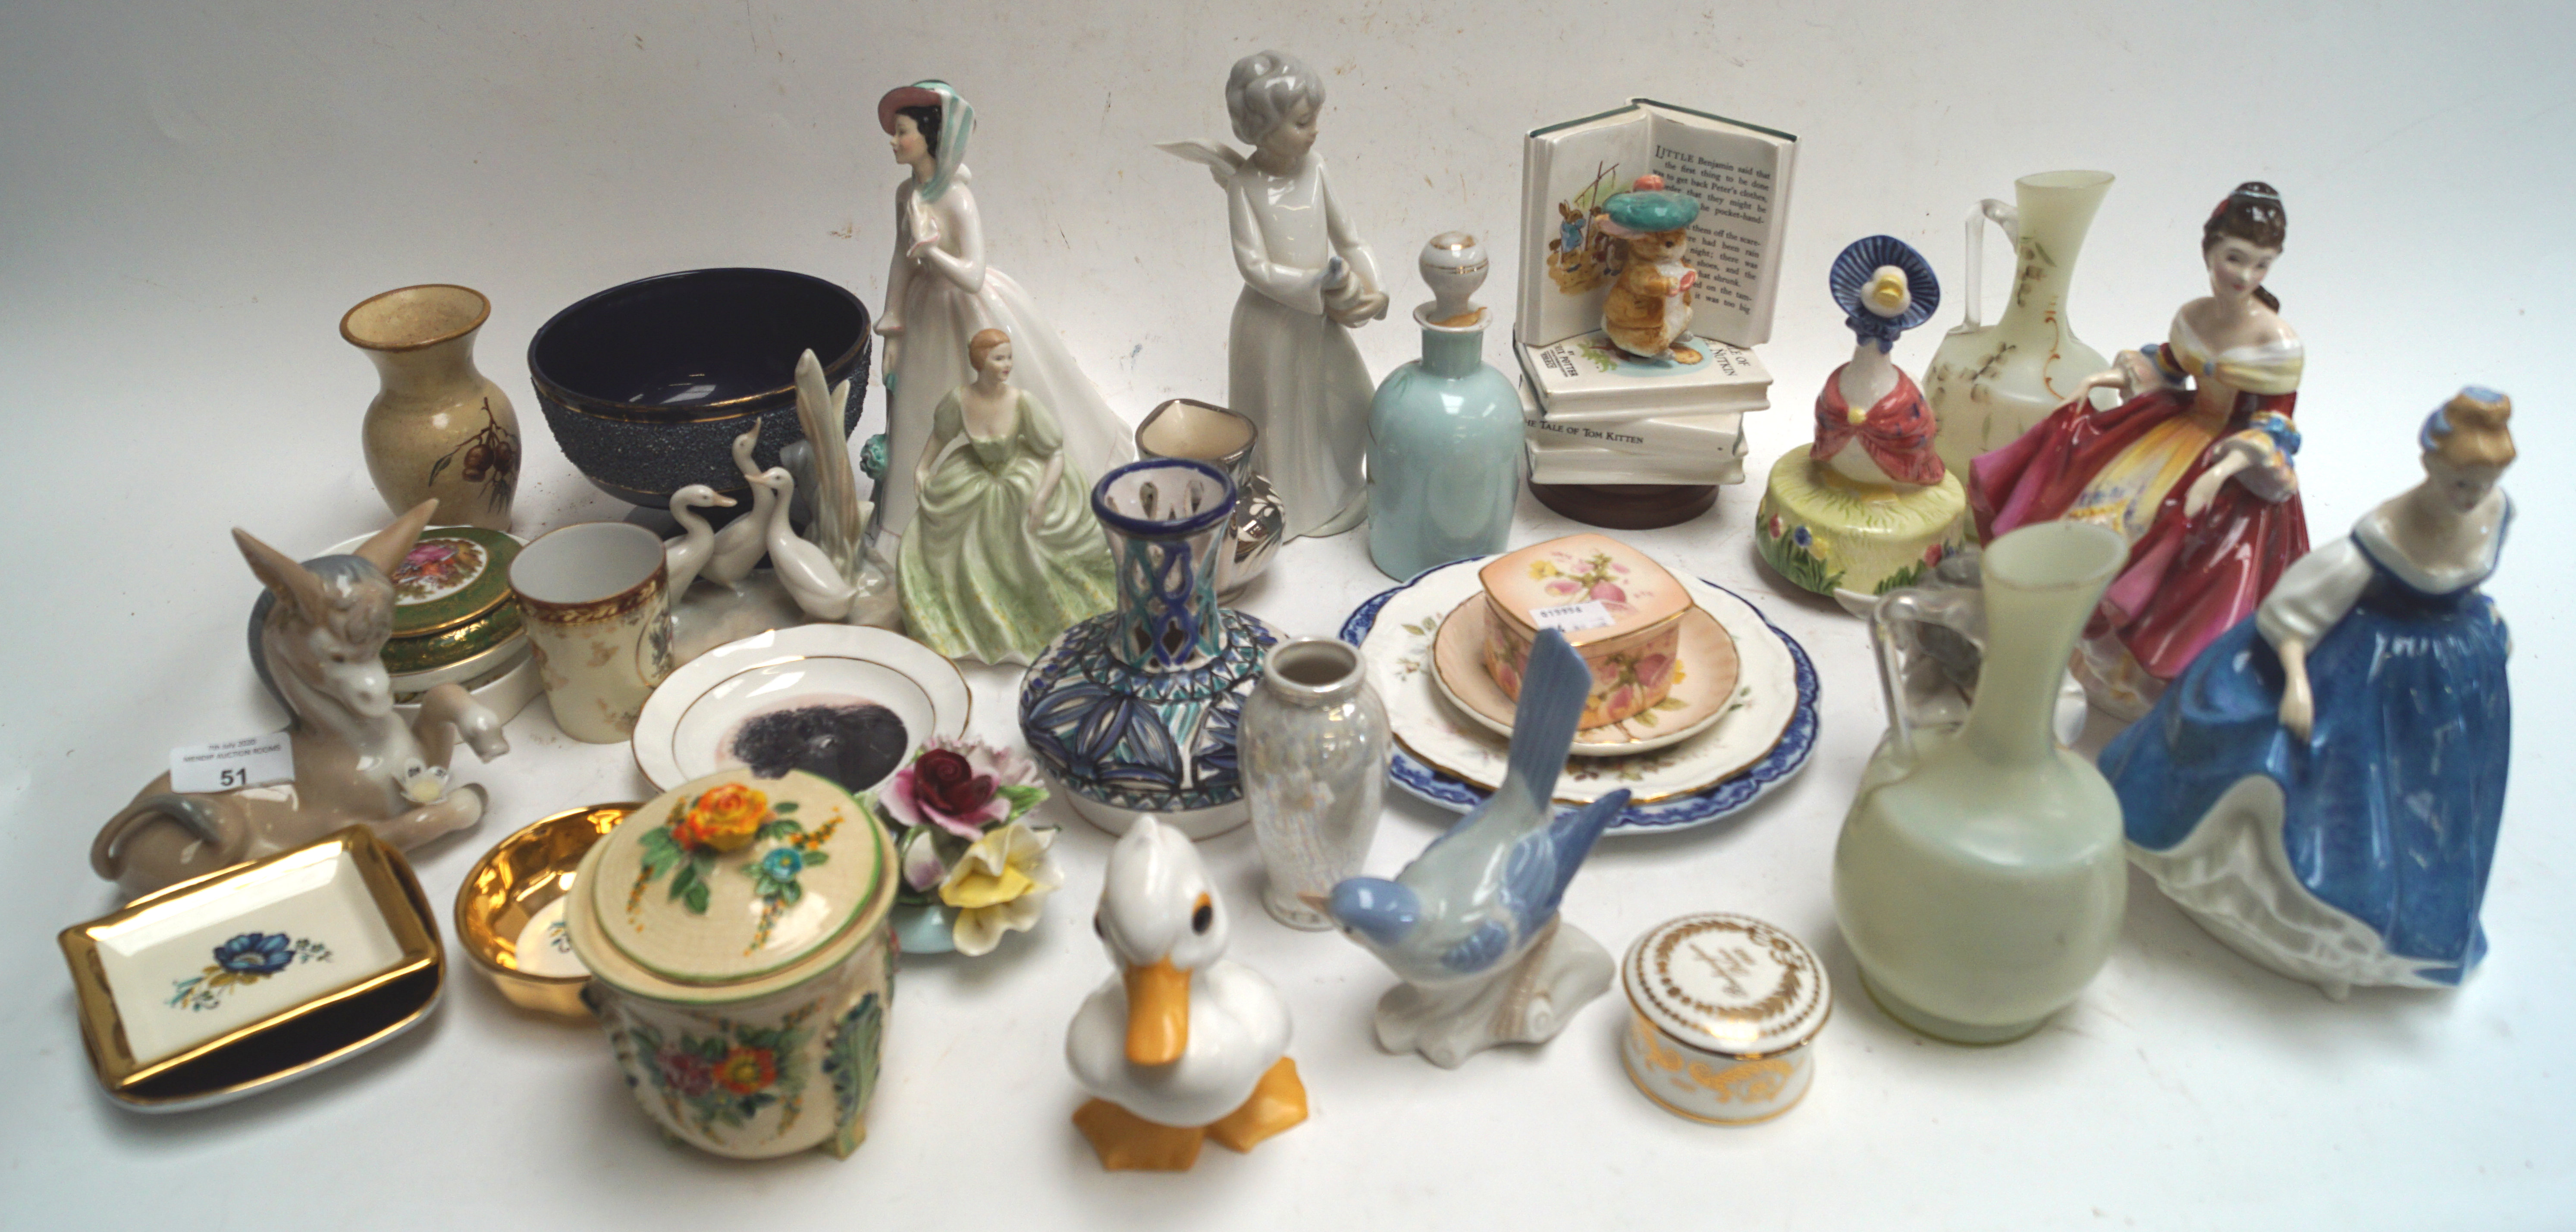 Three Royal Doulton figures and other china